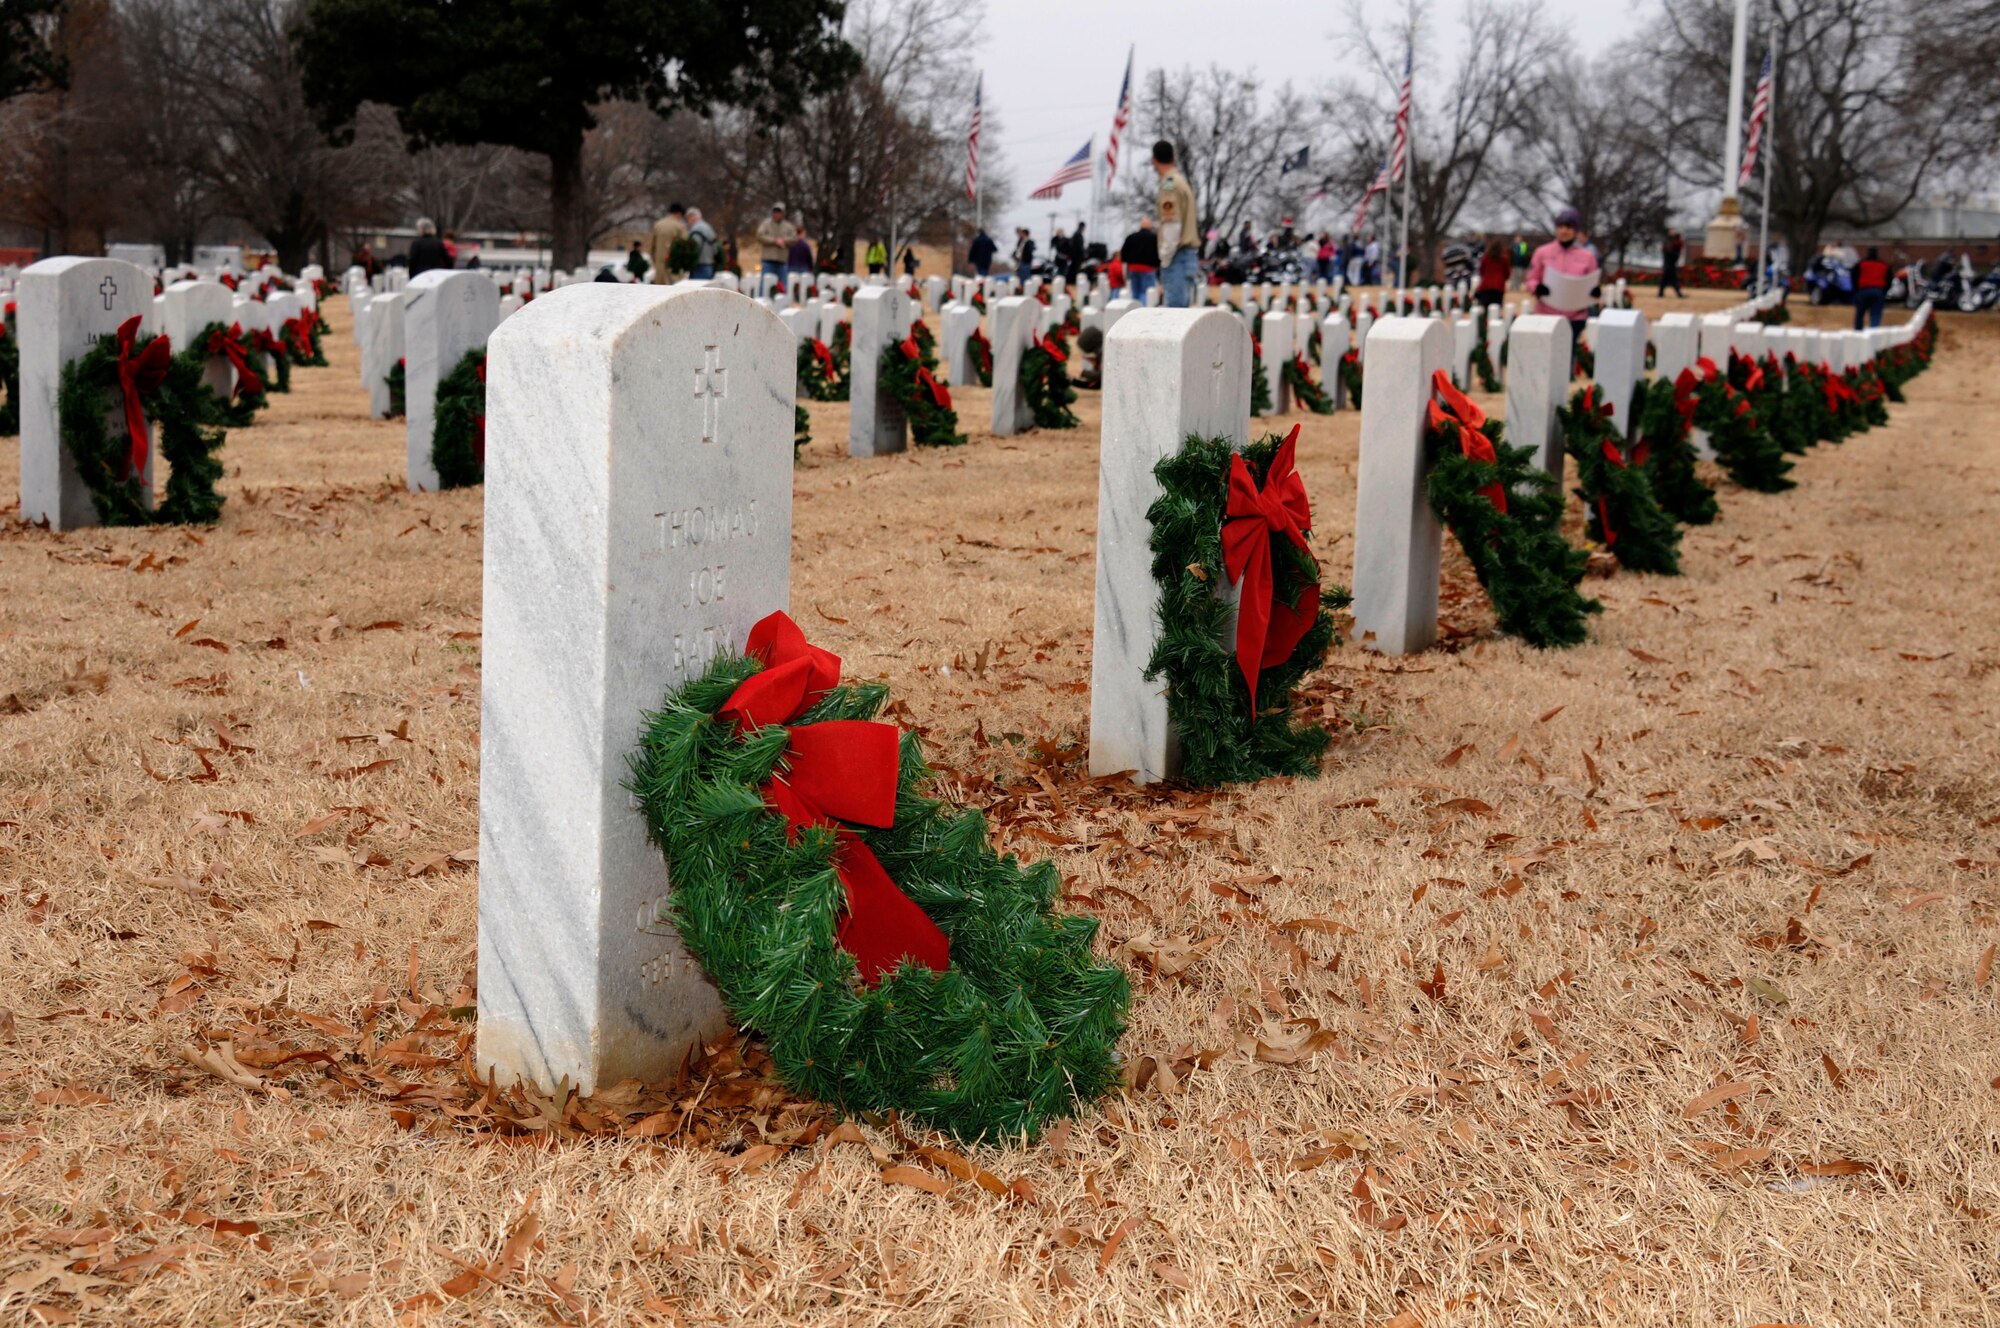 Airmen from the 188th Wing Honor Guard posted the colors during the annual Christmas Honors wreath ceremony at the U.S. National Cemetery in Fort Smith, Ark., Dec. 13, 2014. In 2009, the Fort Smith Regional Chamber of Commerce held the first Christmas Honors inspired by the Wreaths Across America program. Wreaths Across America was founded by Morrill Worcester to remember the fallen, honor those who served and teach children the value of freedom. (U.S. Air National Guard photo by Staff Sgt. Hannah Dickerson/released)